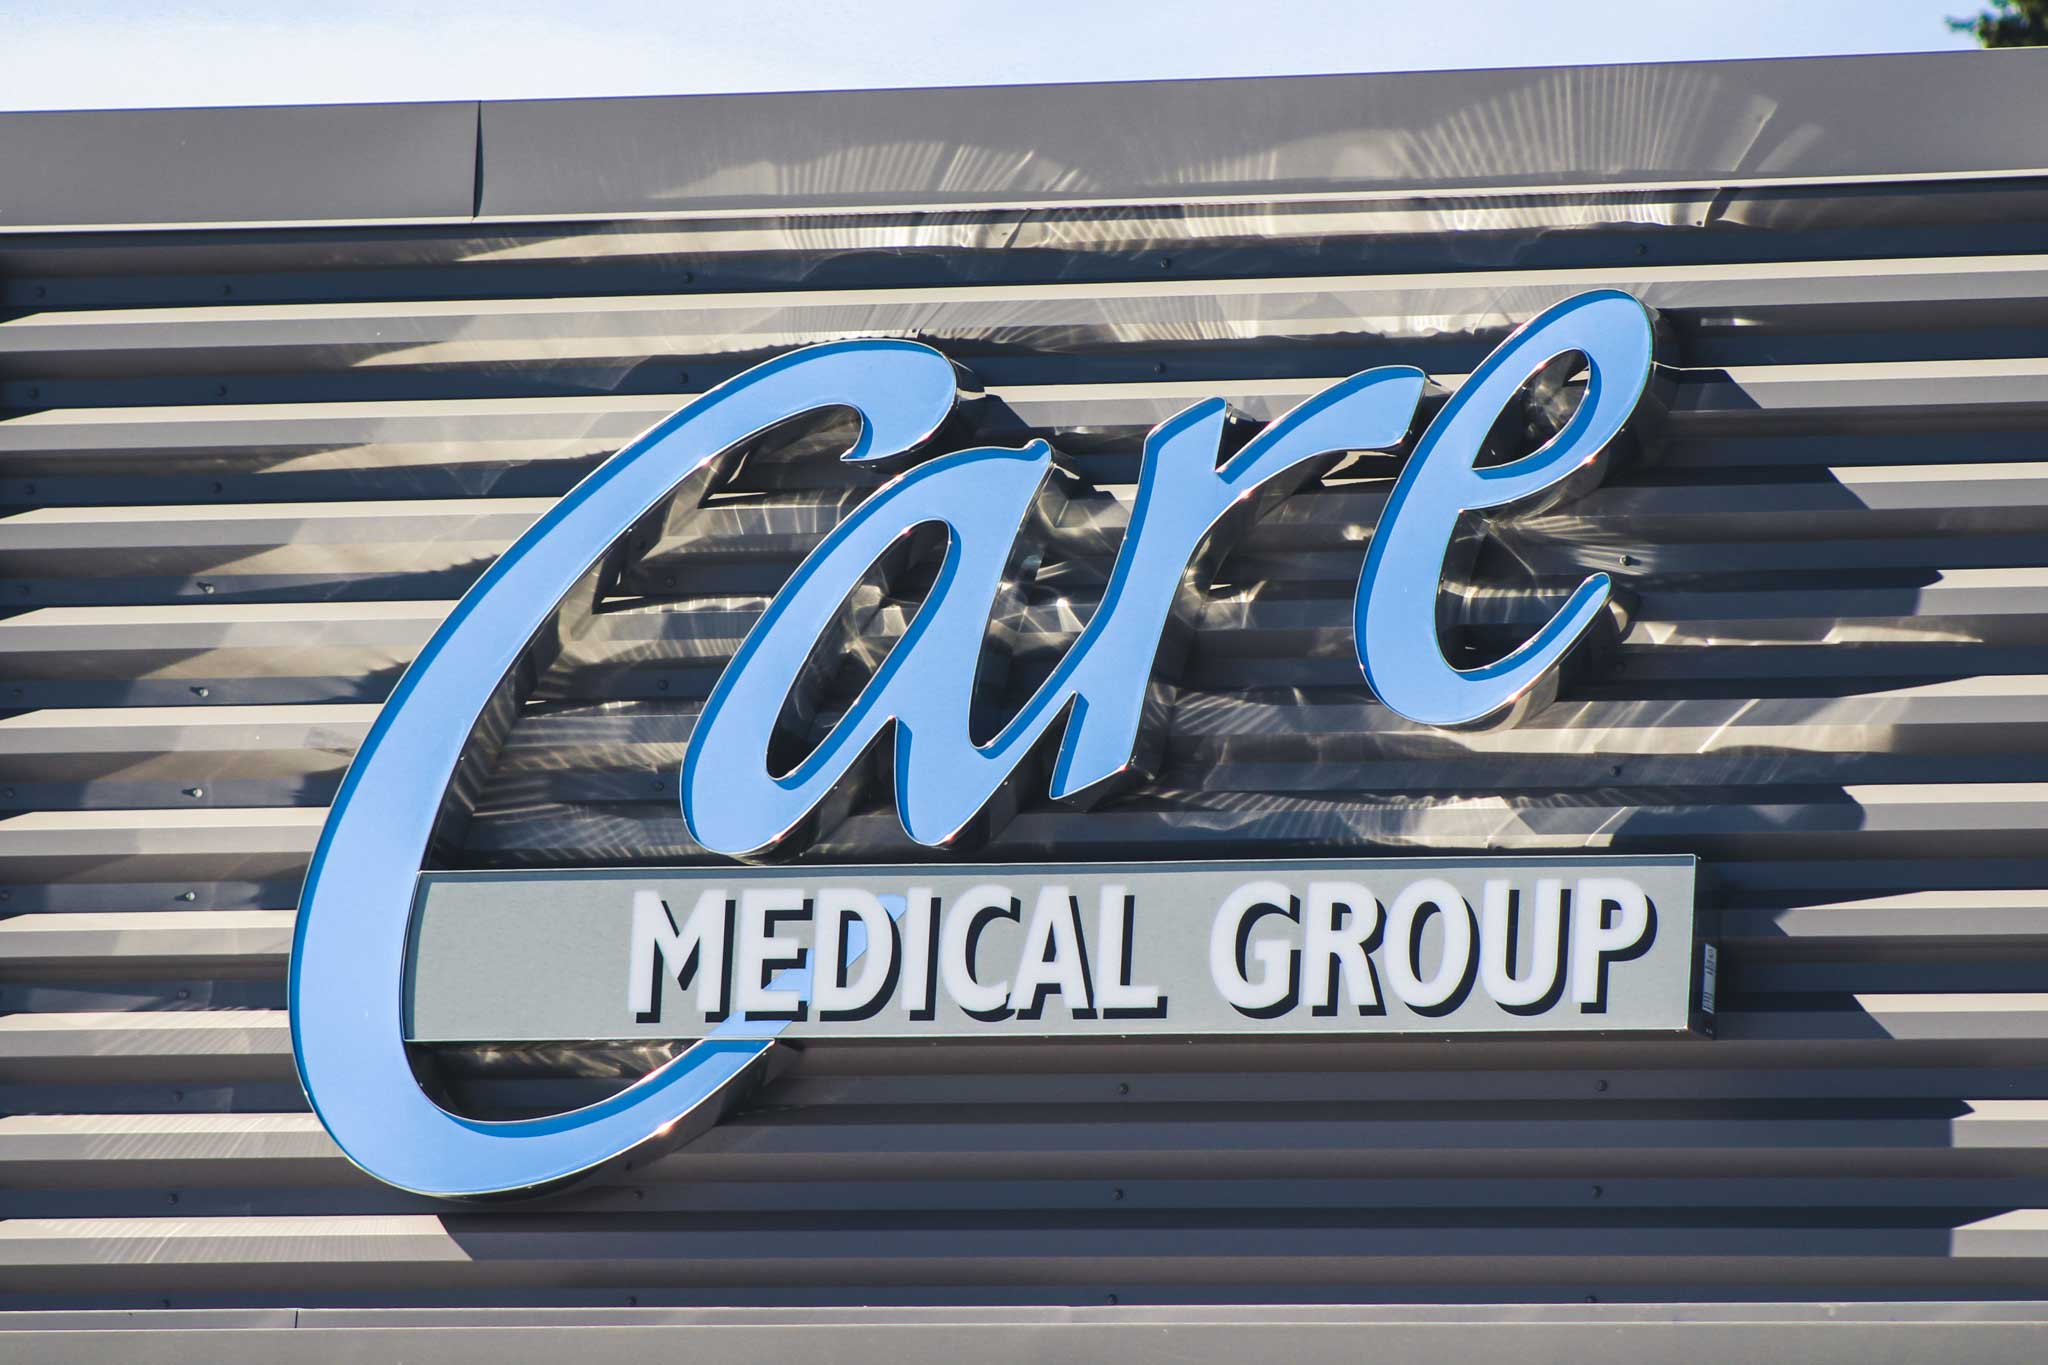 care-medical-group-reflective-channel-letters-front-view